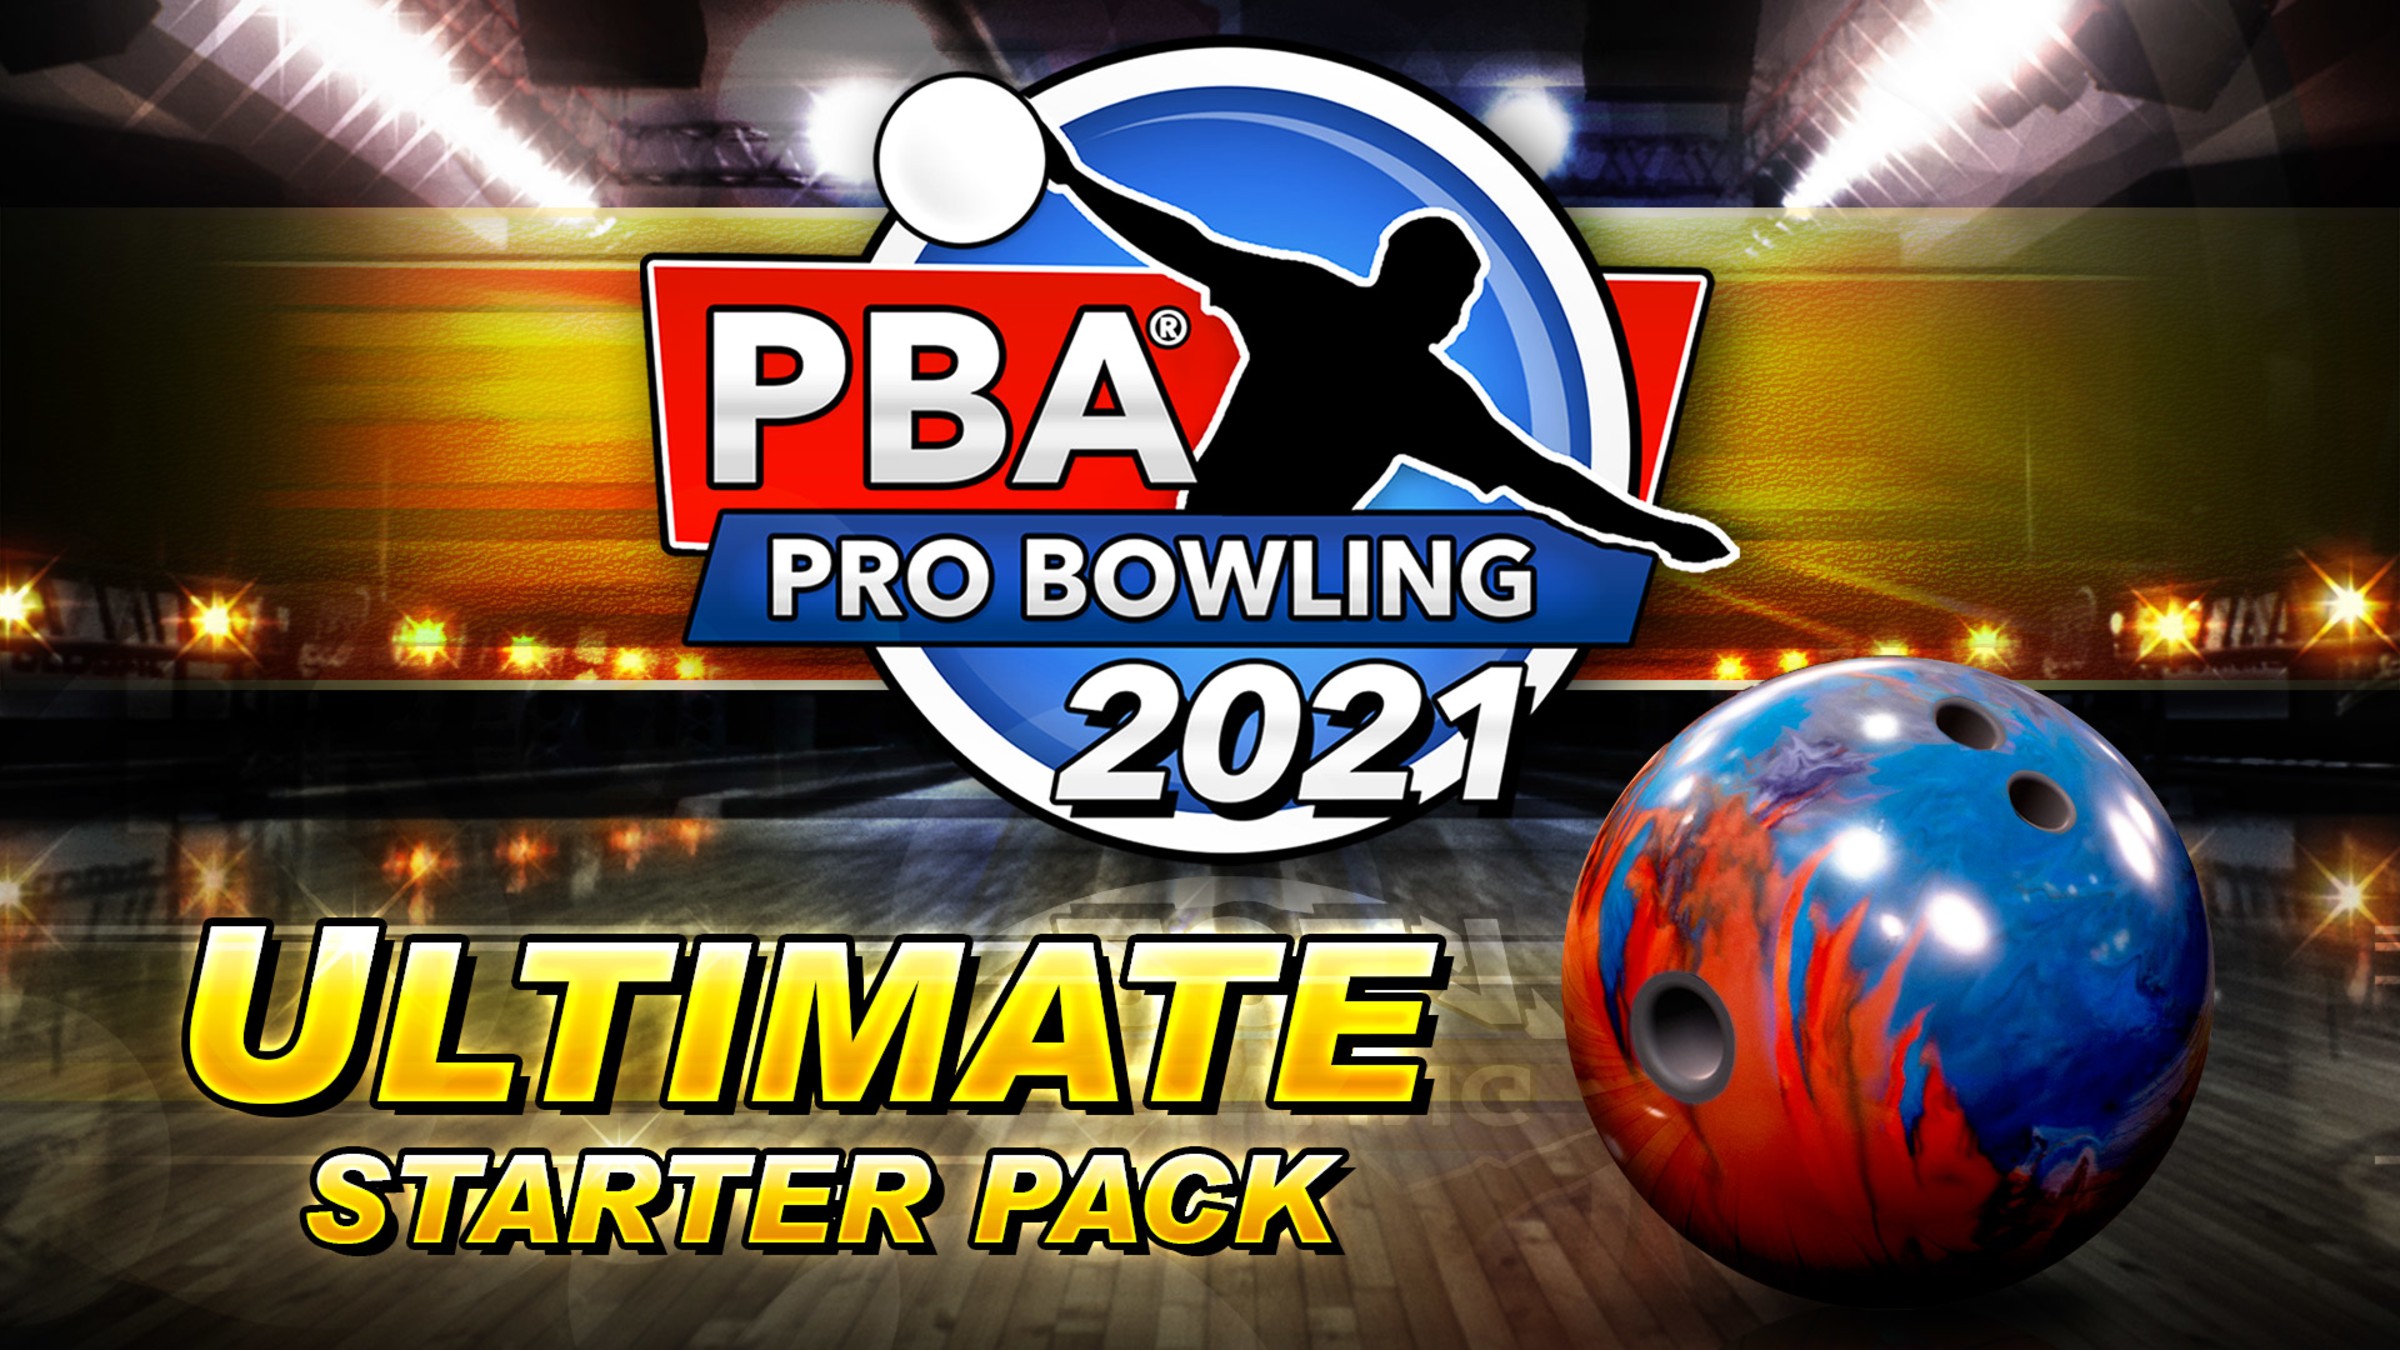 PBA Pro Bowling 2021 - Ultimate Starter Pack for Nintendo Switch